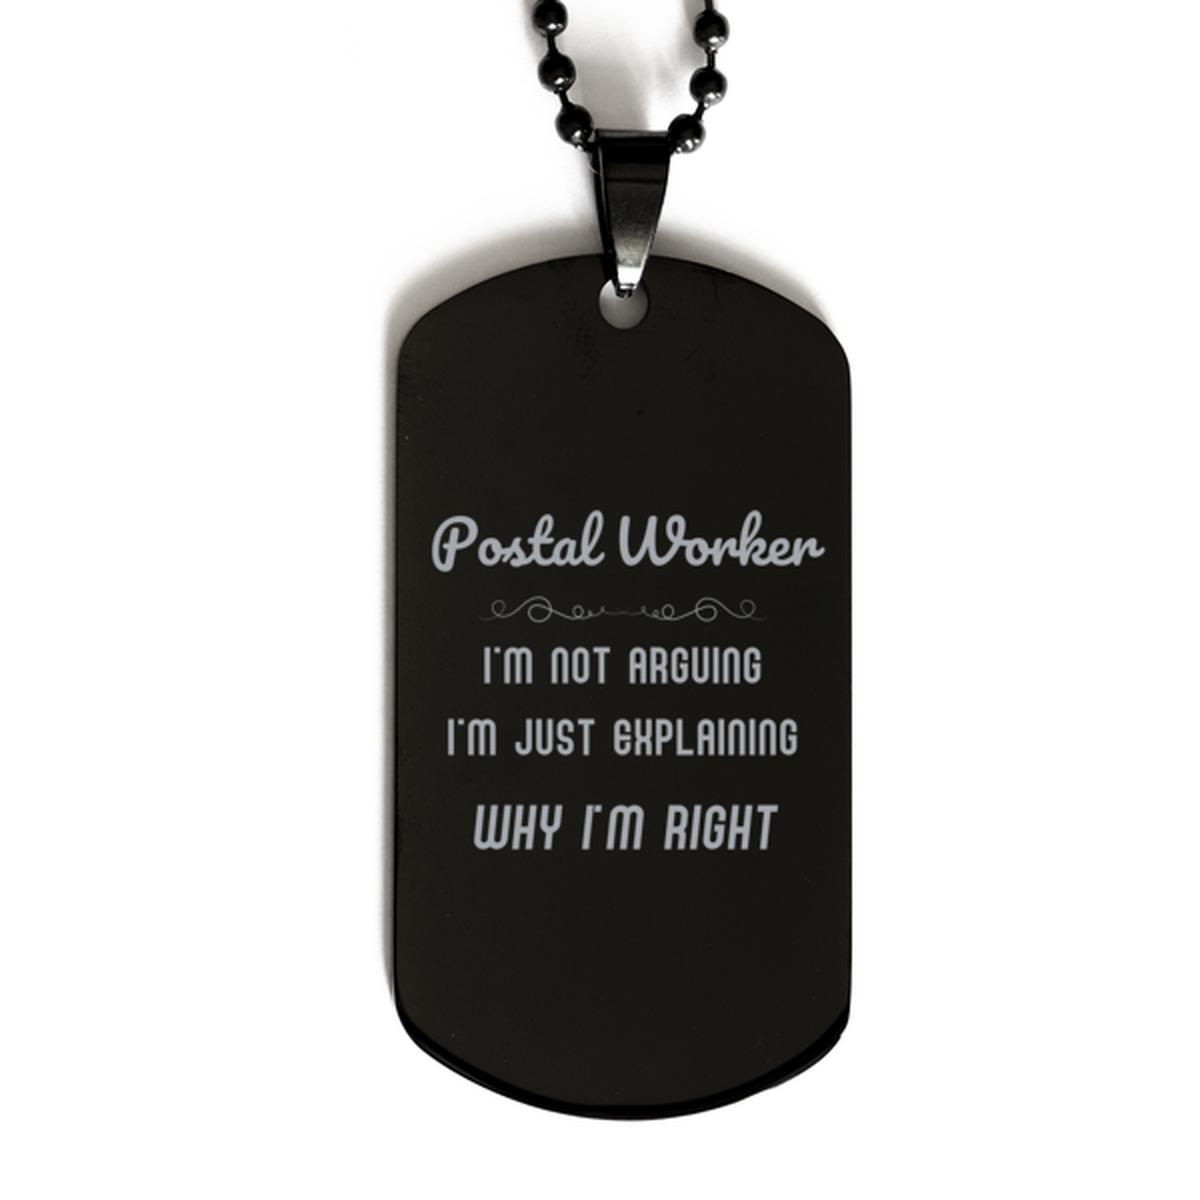 Postal Worker I'm not Arguing. I'm Just Explaining Why I'm RIGHT Black Dog Tag, Funny Saying Quote Postal Worker Gifts For Postal Worker Graduation Birthday Christmas Gifts for Men Women Coworker